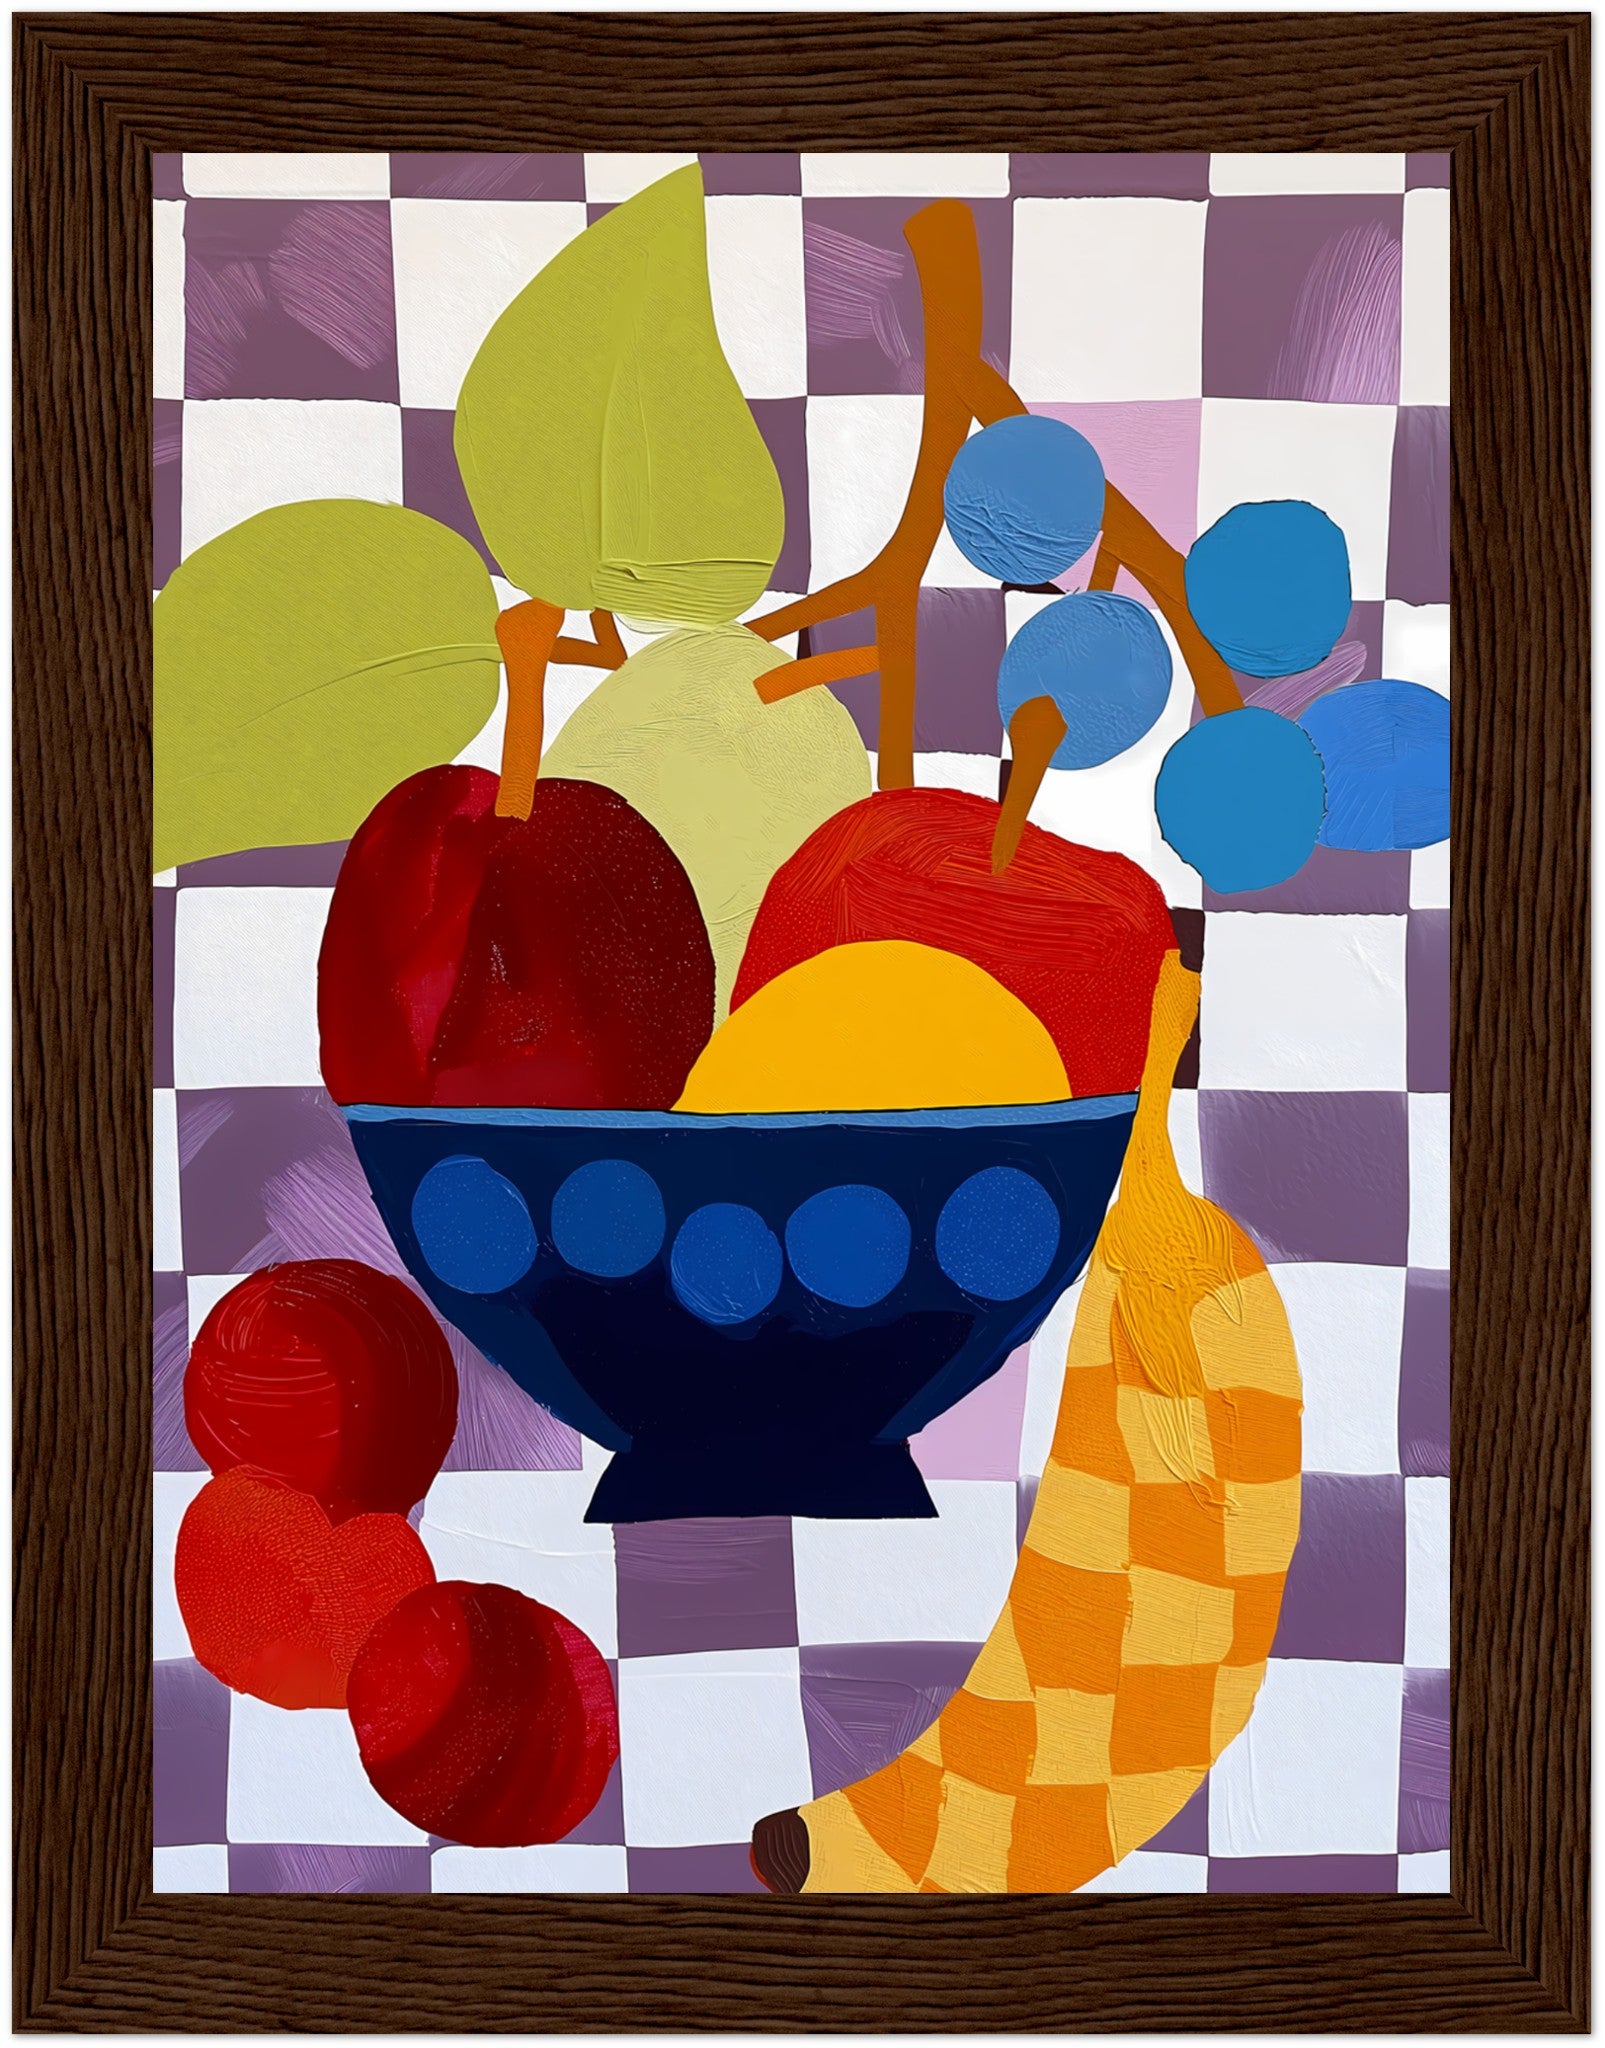 Abstract artwork of a fruit bowl with colorful, stylized shapes.